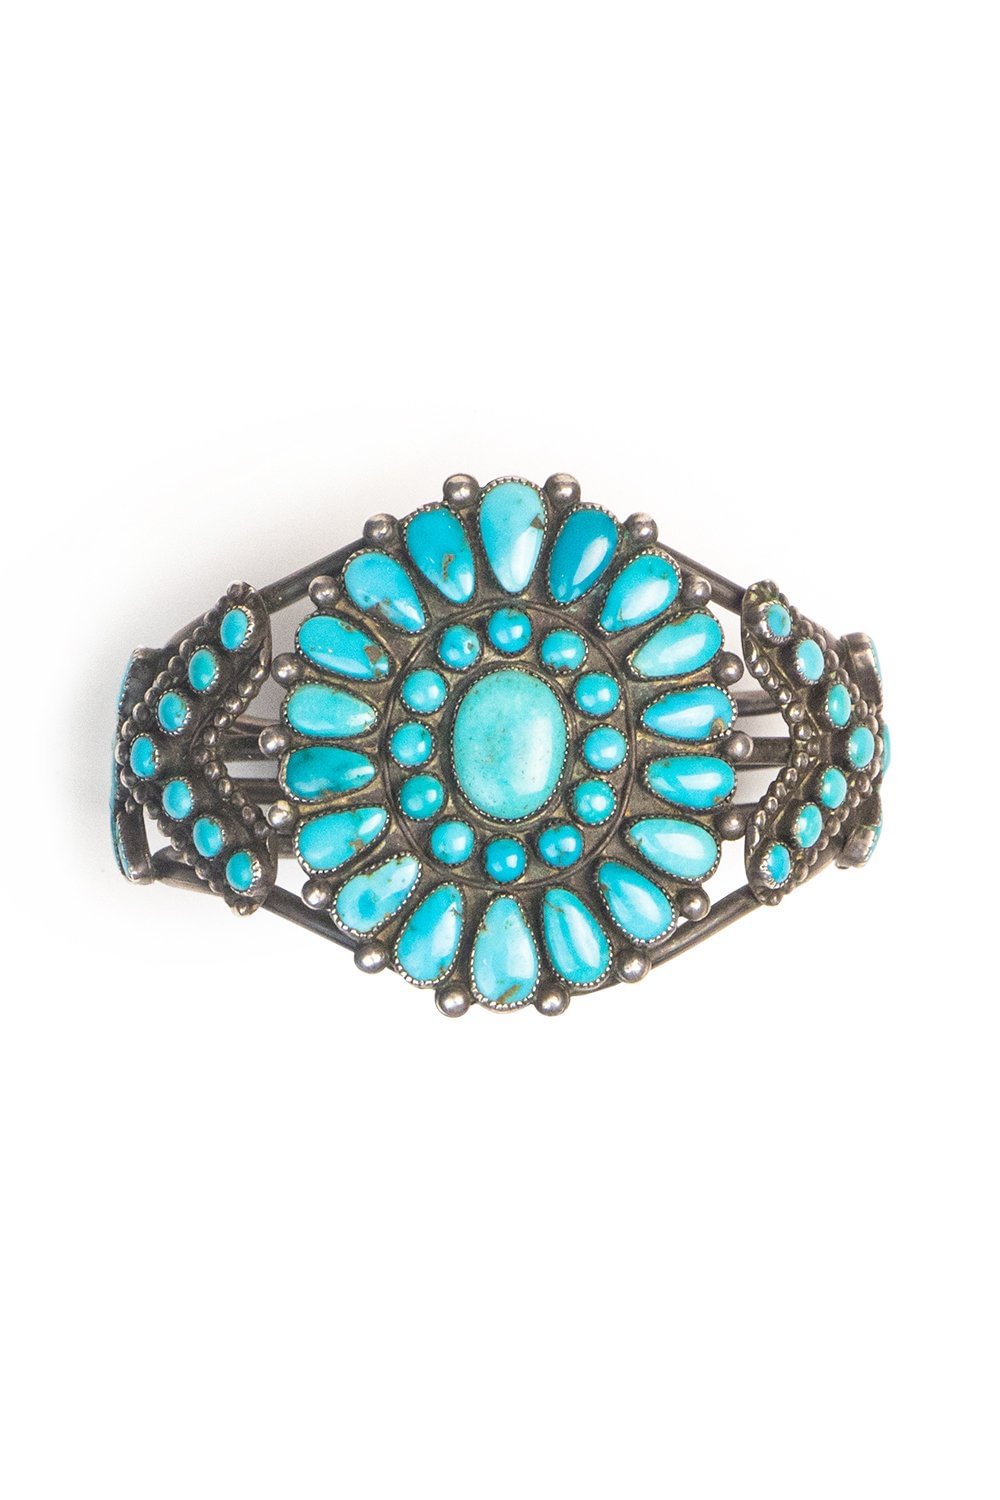 Cuff, Cluster, Turquoise, Vintage, 1940's, 2581